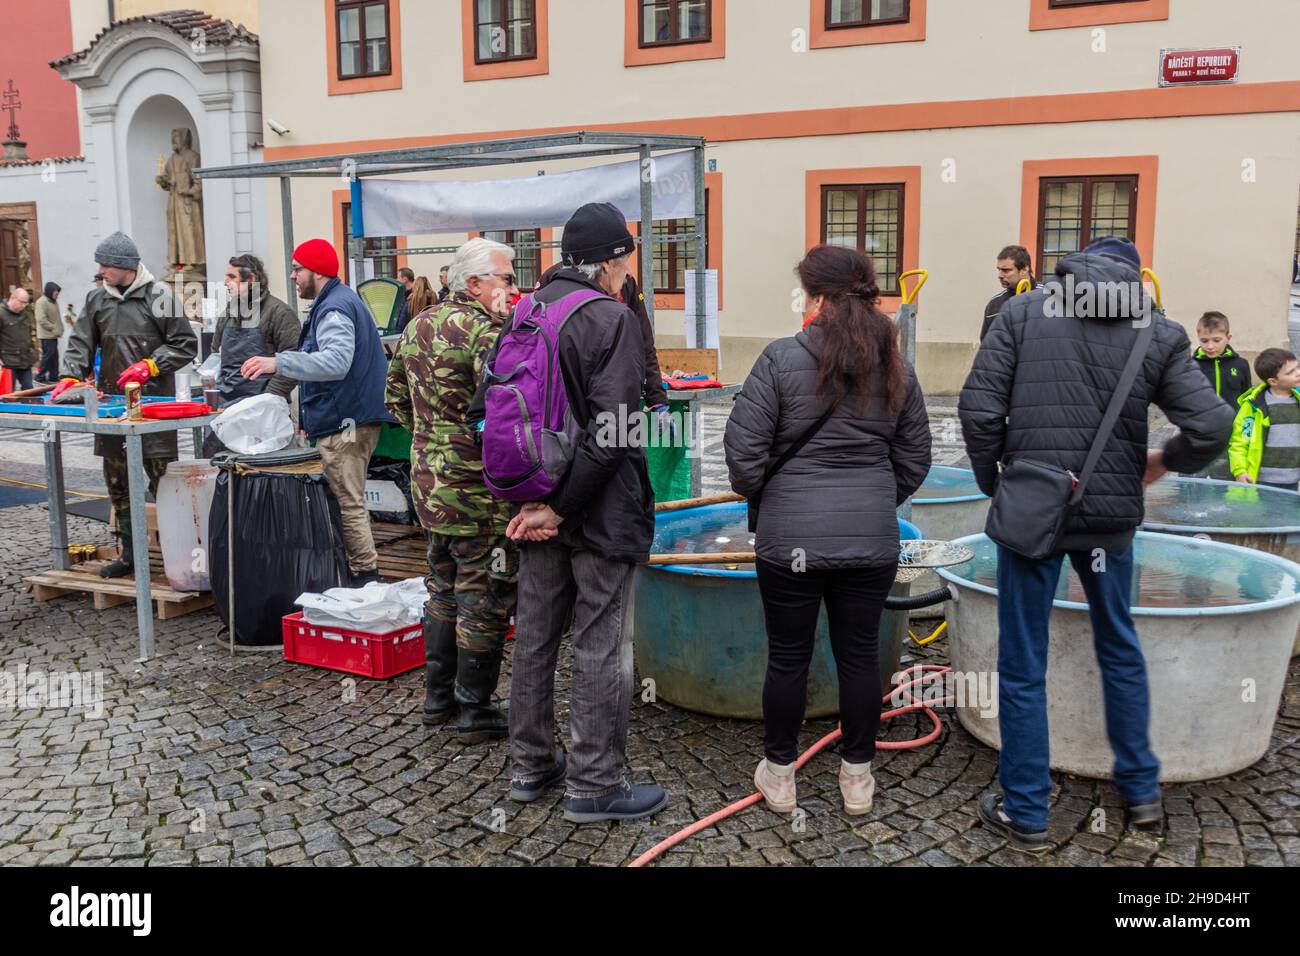 PRAGUE, CZECHIA - DECEMBER 22, 2019: People are buying traditional Christmas carp from a street tanks in Prague, Czech Republic Stock Photo